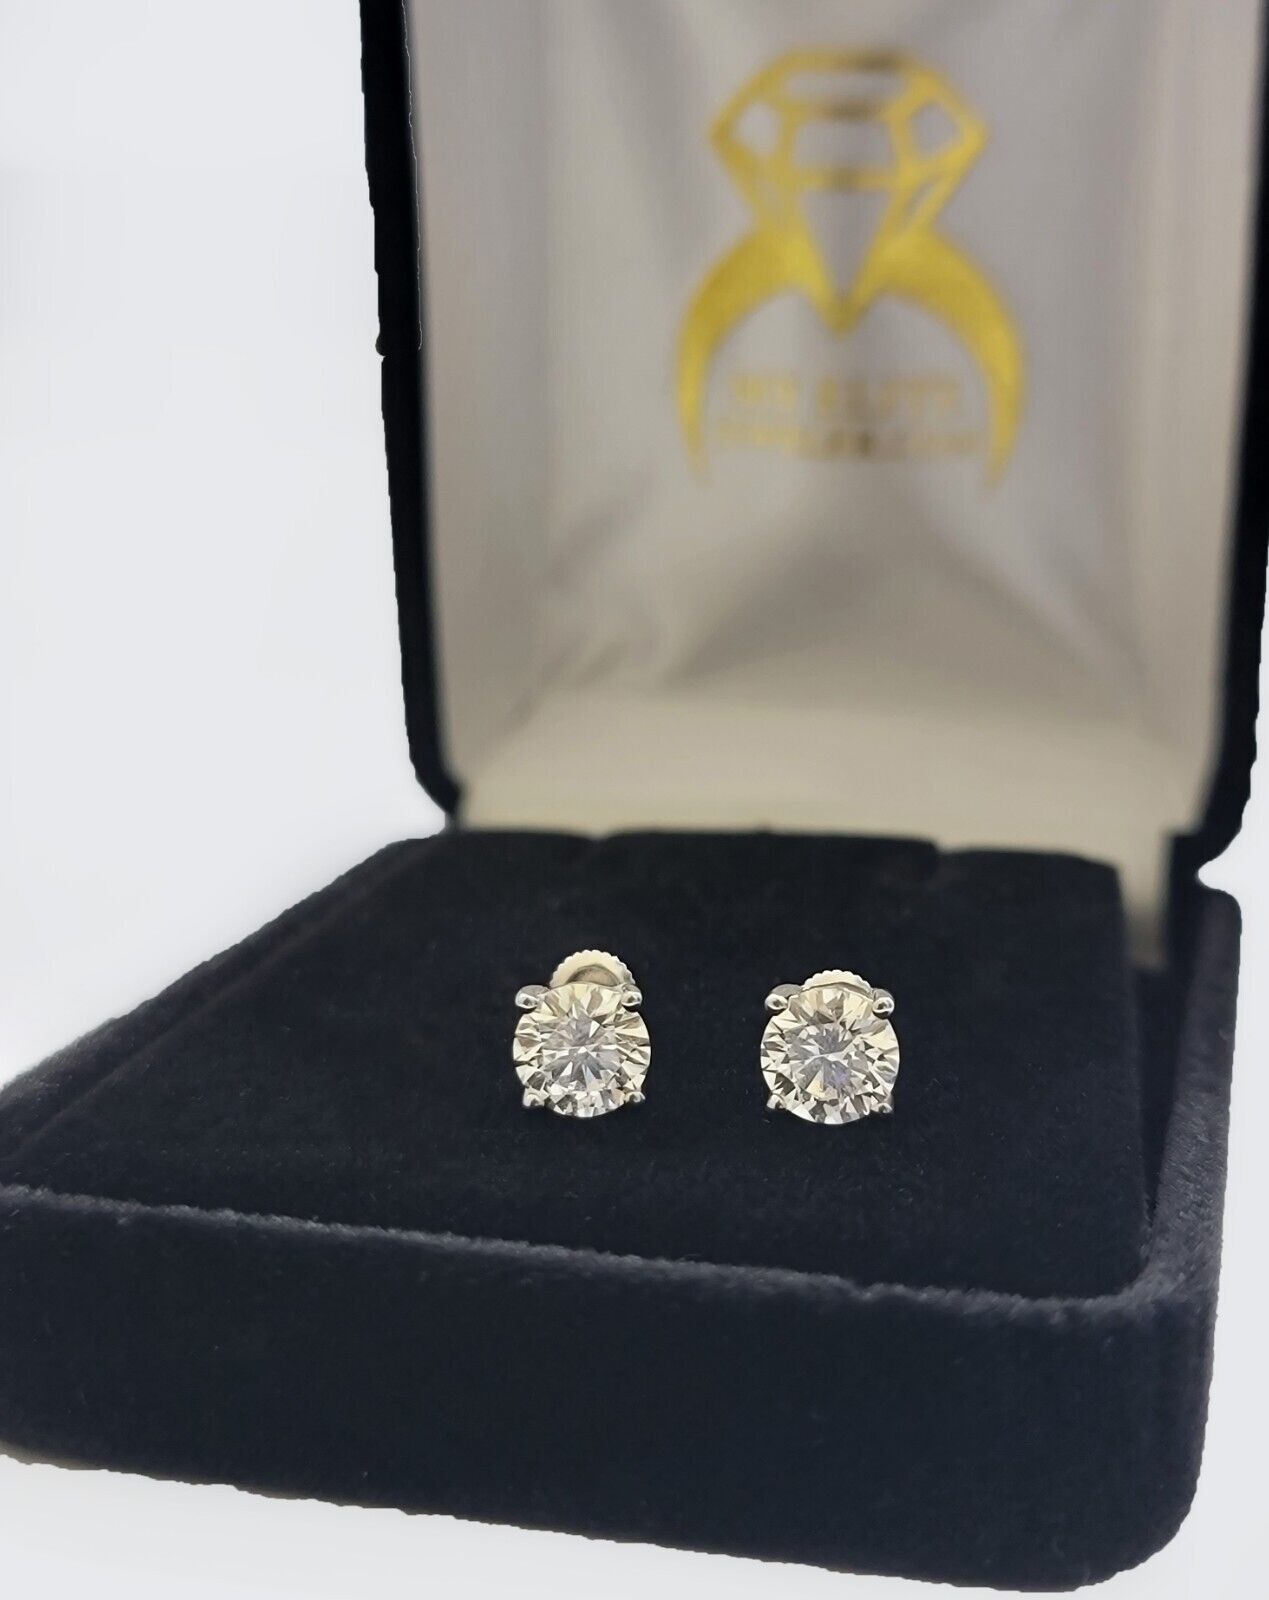 Real 2CT Round Brilliant Cut Diamond Stud Earring In 14K Gold Lab Created VS ADJUSTED LISTING